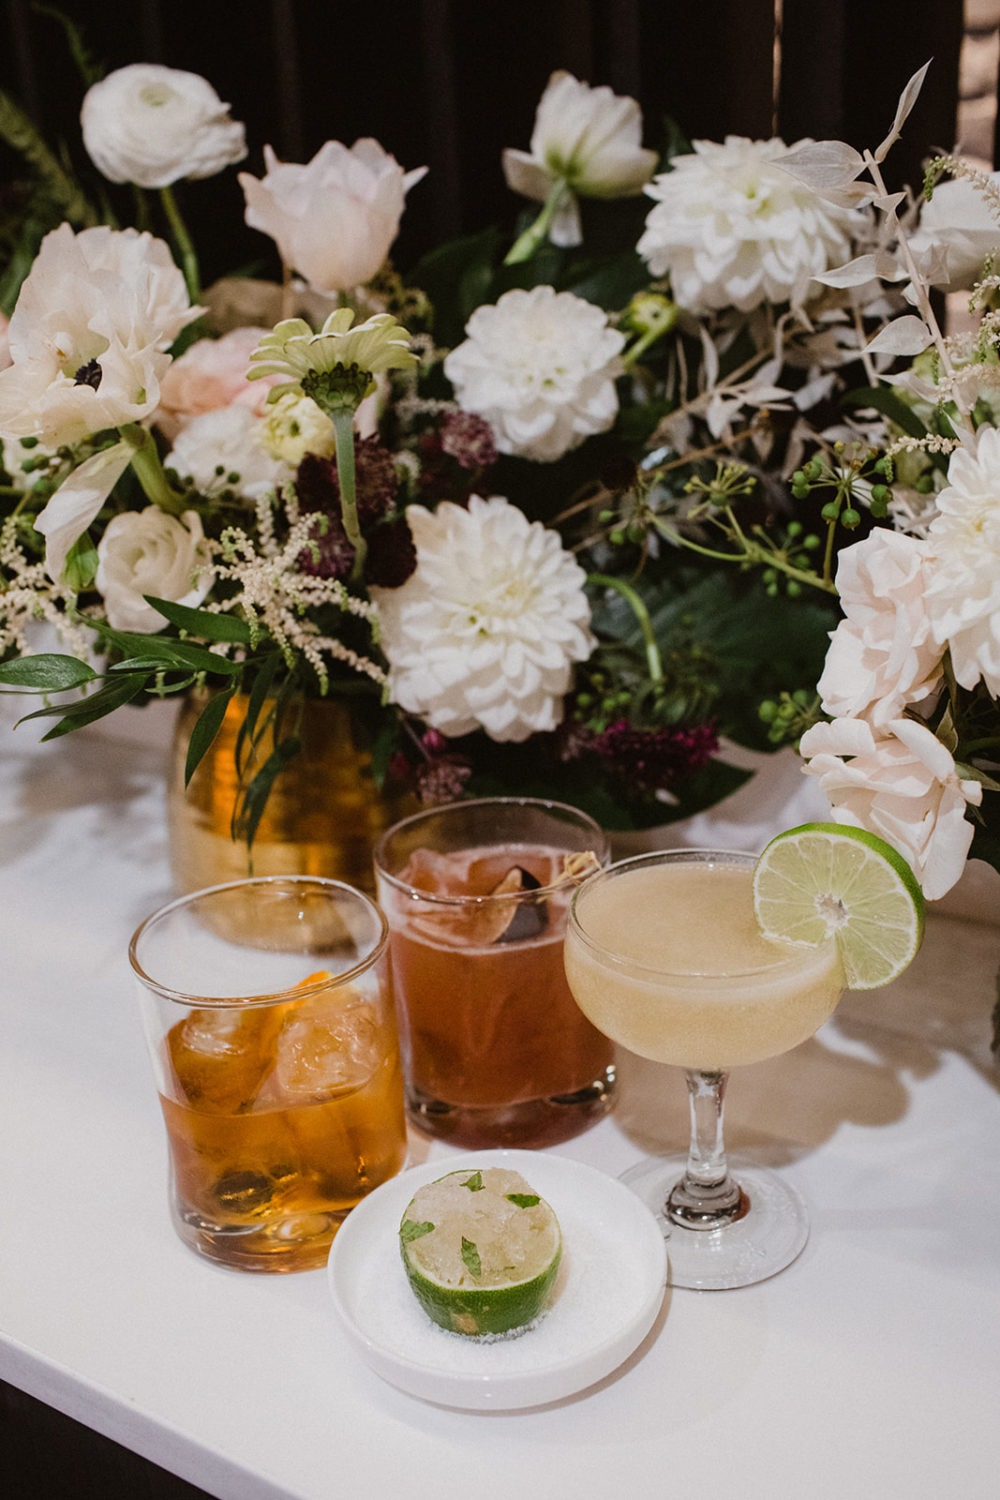 Cocktail options at DC wedding